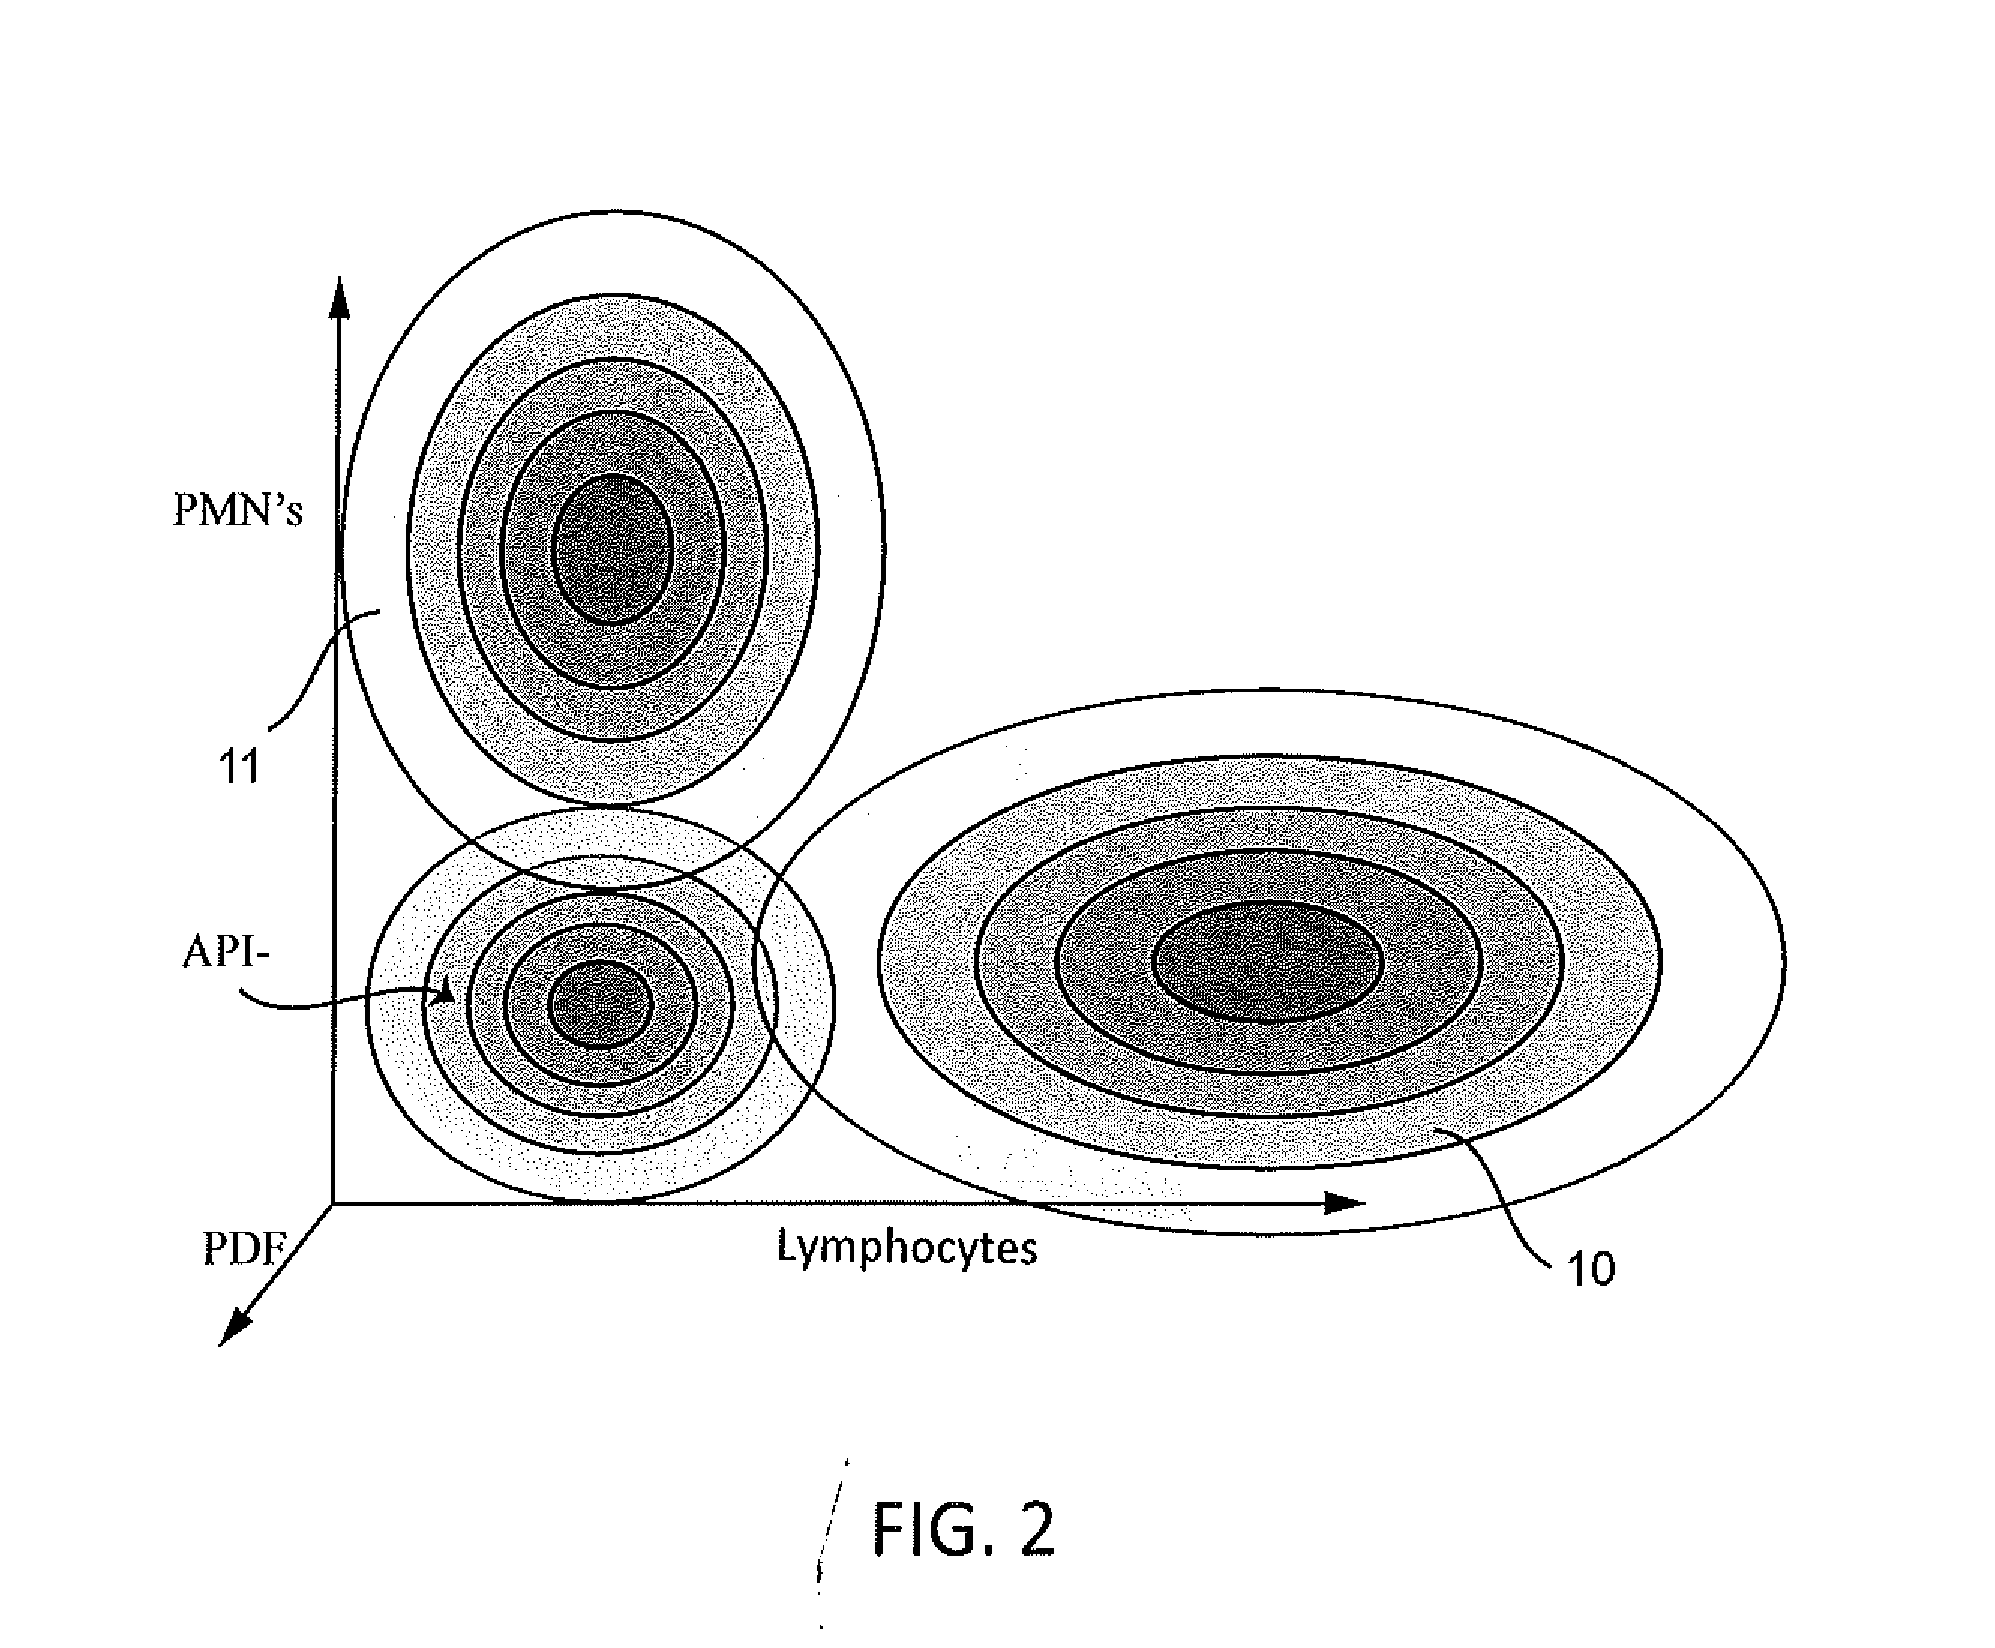 Method and Apparatus for the Biopsy and Diagnosis of Precancerous Inflammation and Crohn's Inflammatory Bowel Disease